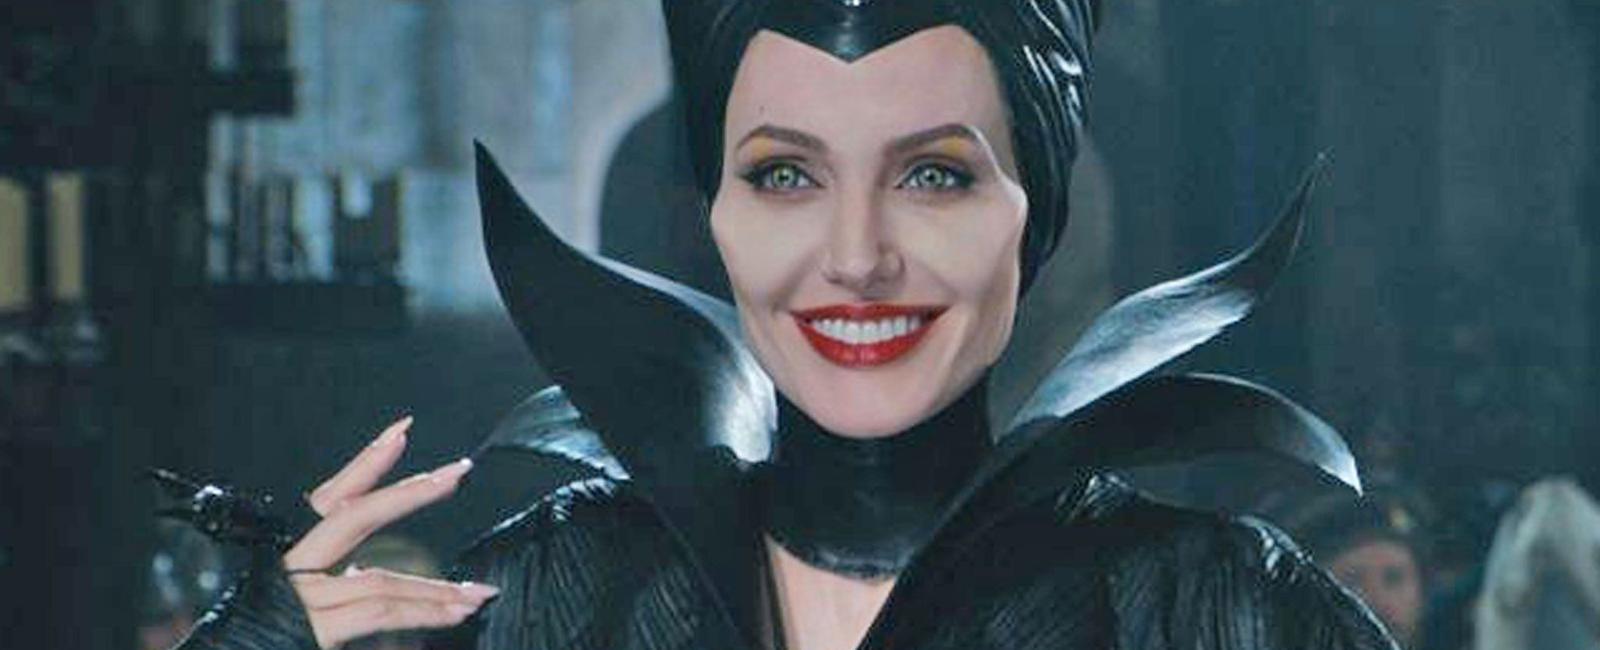 Angelina jolie admitted that she scared little kids while in costume on the set of maleficent her daughter who played young aurora was the only child who was not scared of her